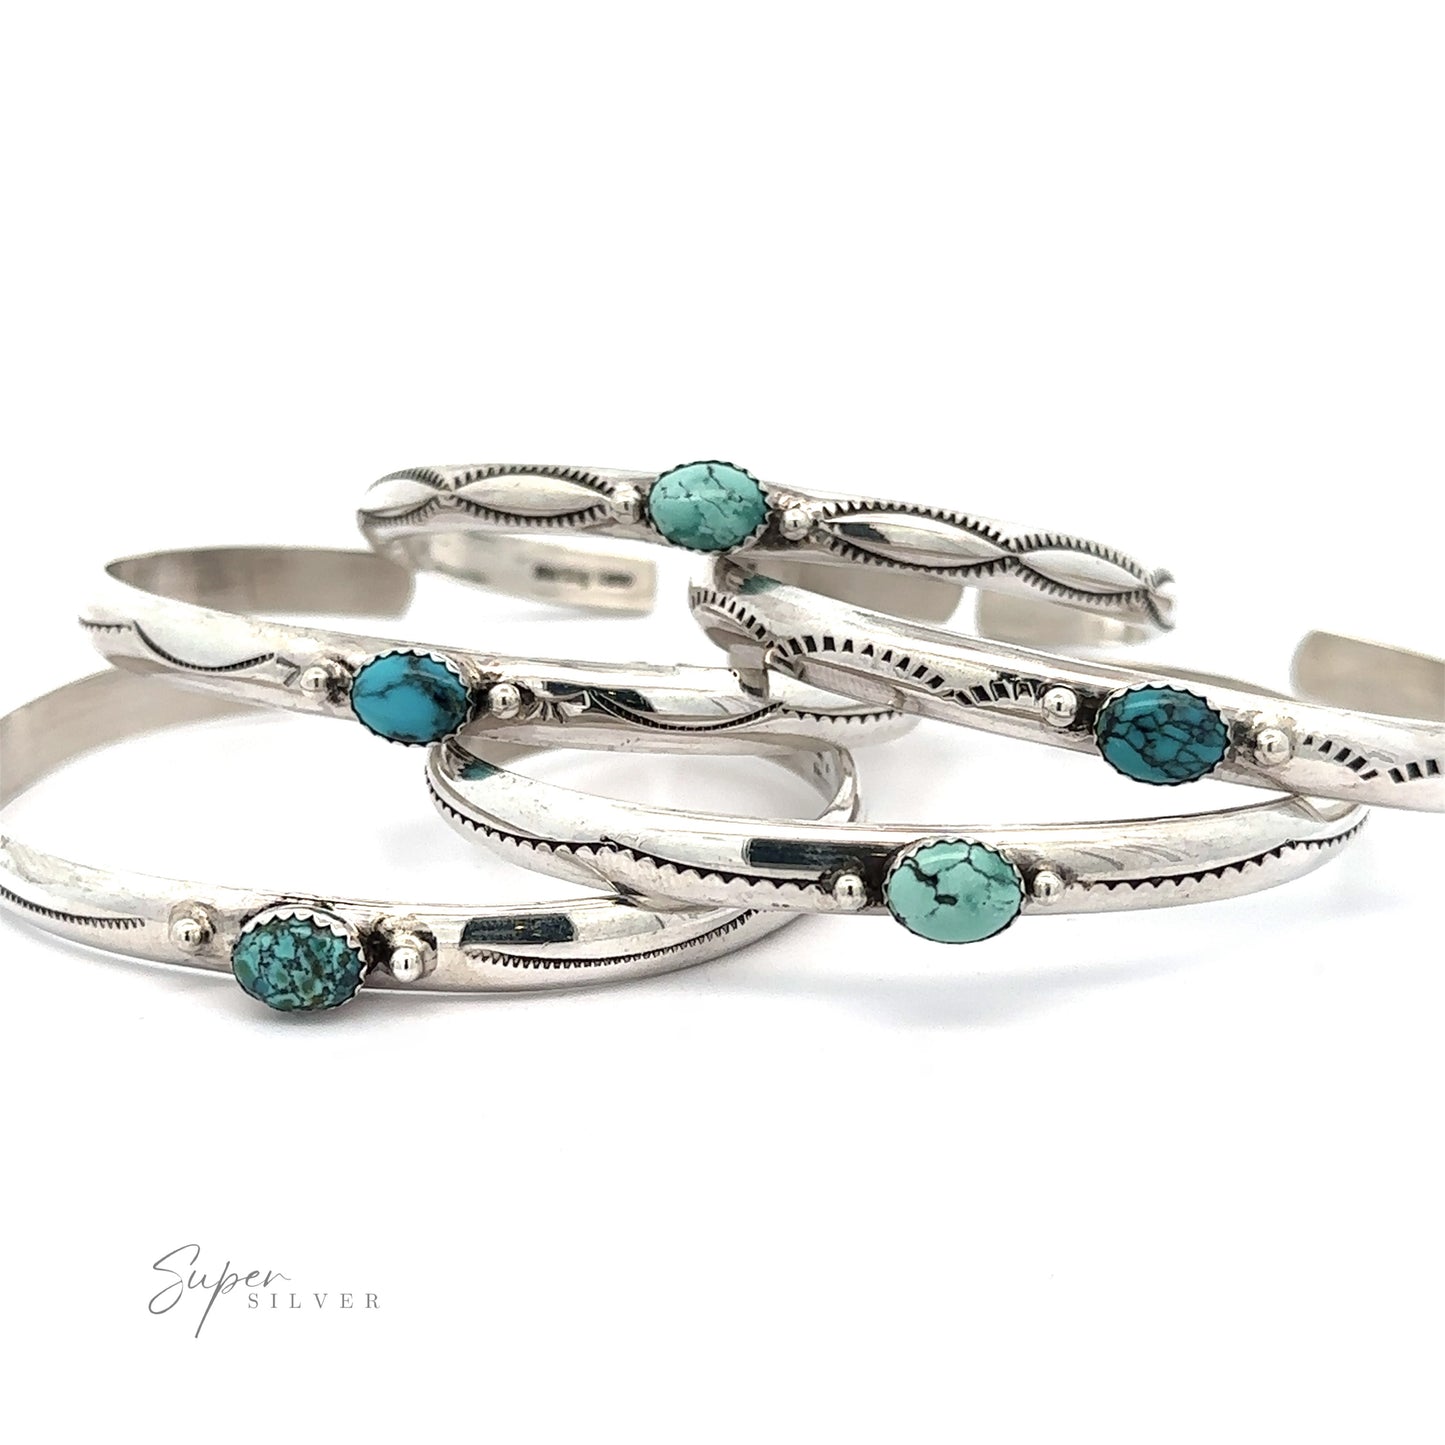 Five Striking Native American Turquoise Cuffs with Diamond Etching are arranged overlapping each other. The design features small, oval-shaped Kingman Turquoise stones. The inscription "Super Silver" is visible in the corner, highlighting the .925 Sterling Silver quality and handcrafted Navajo cuff artistry.